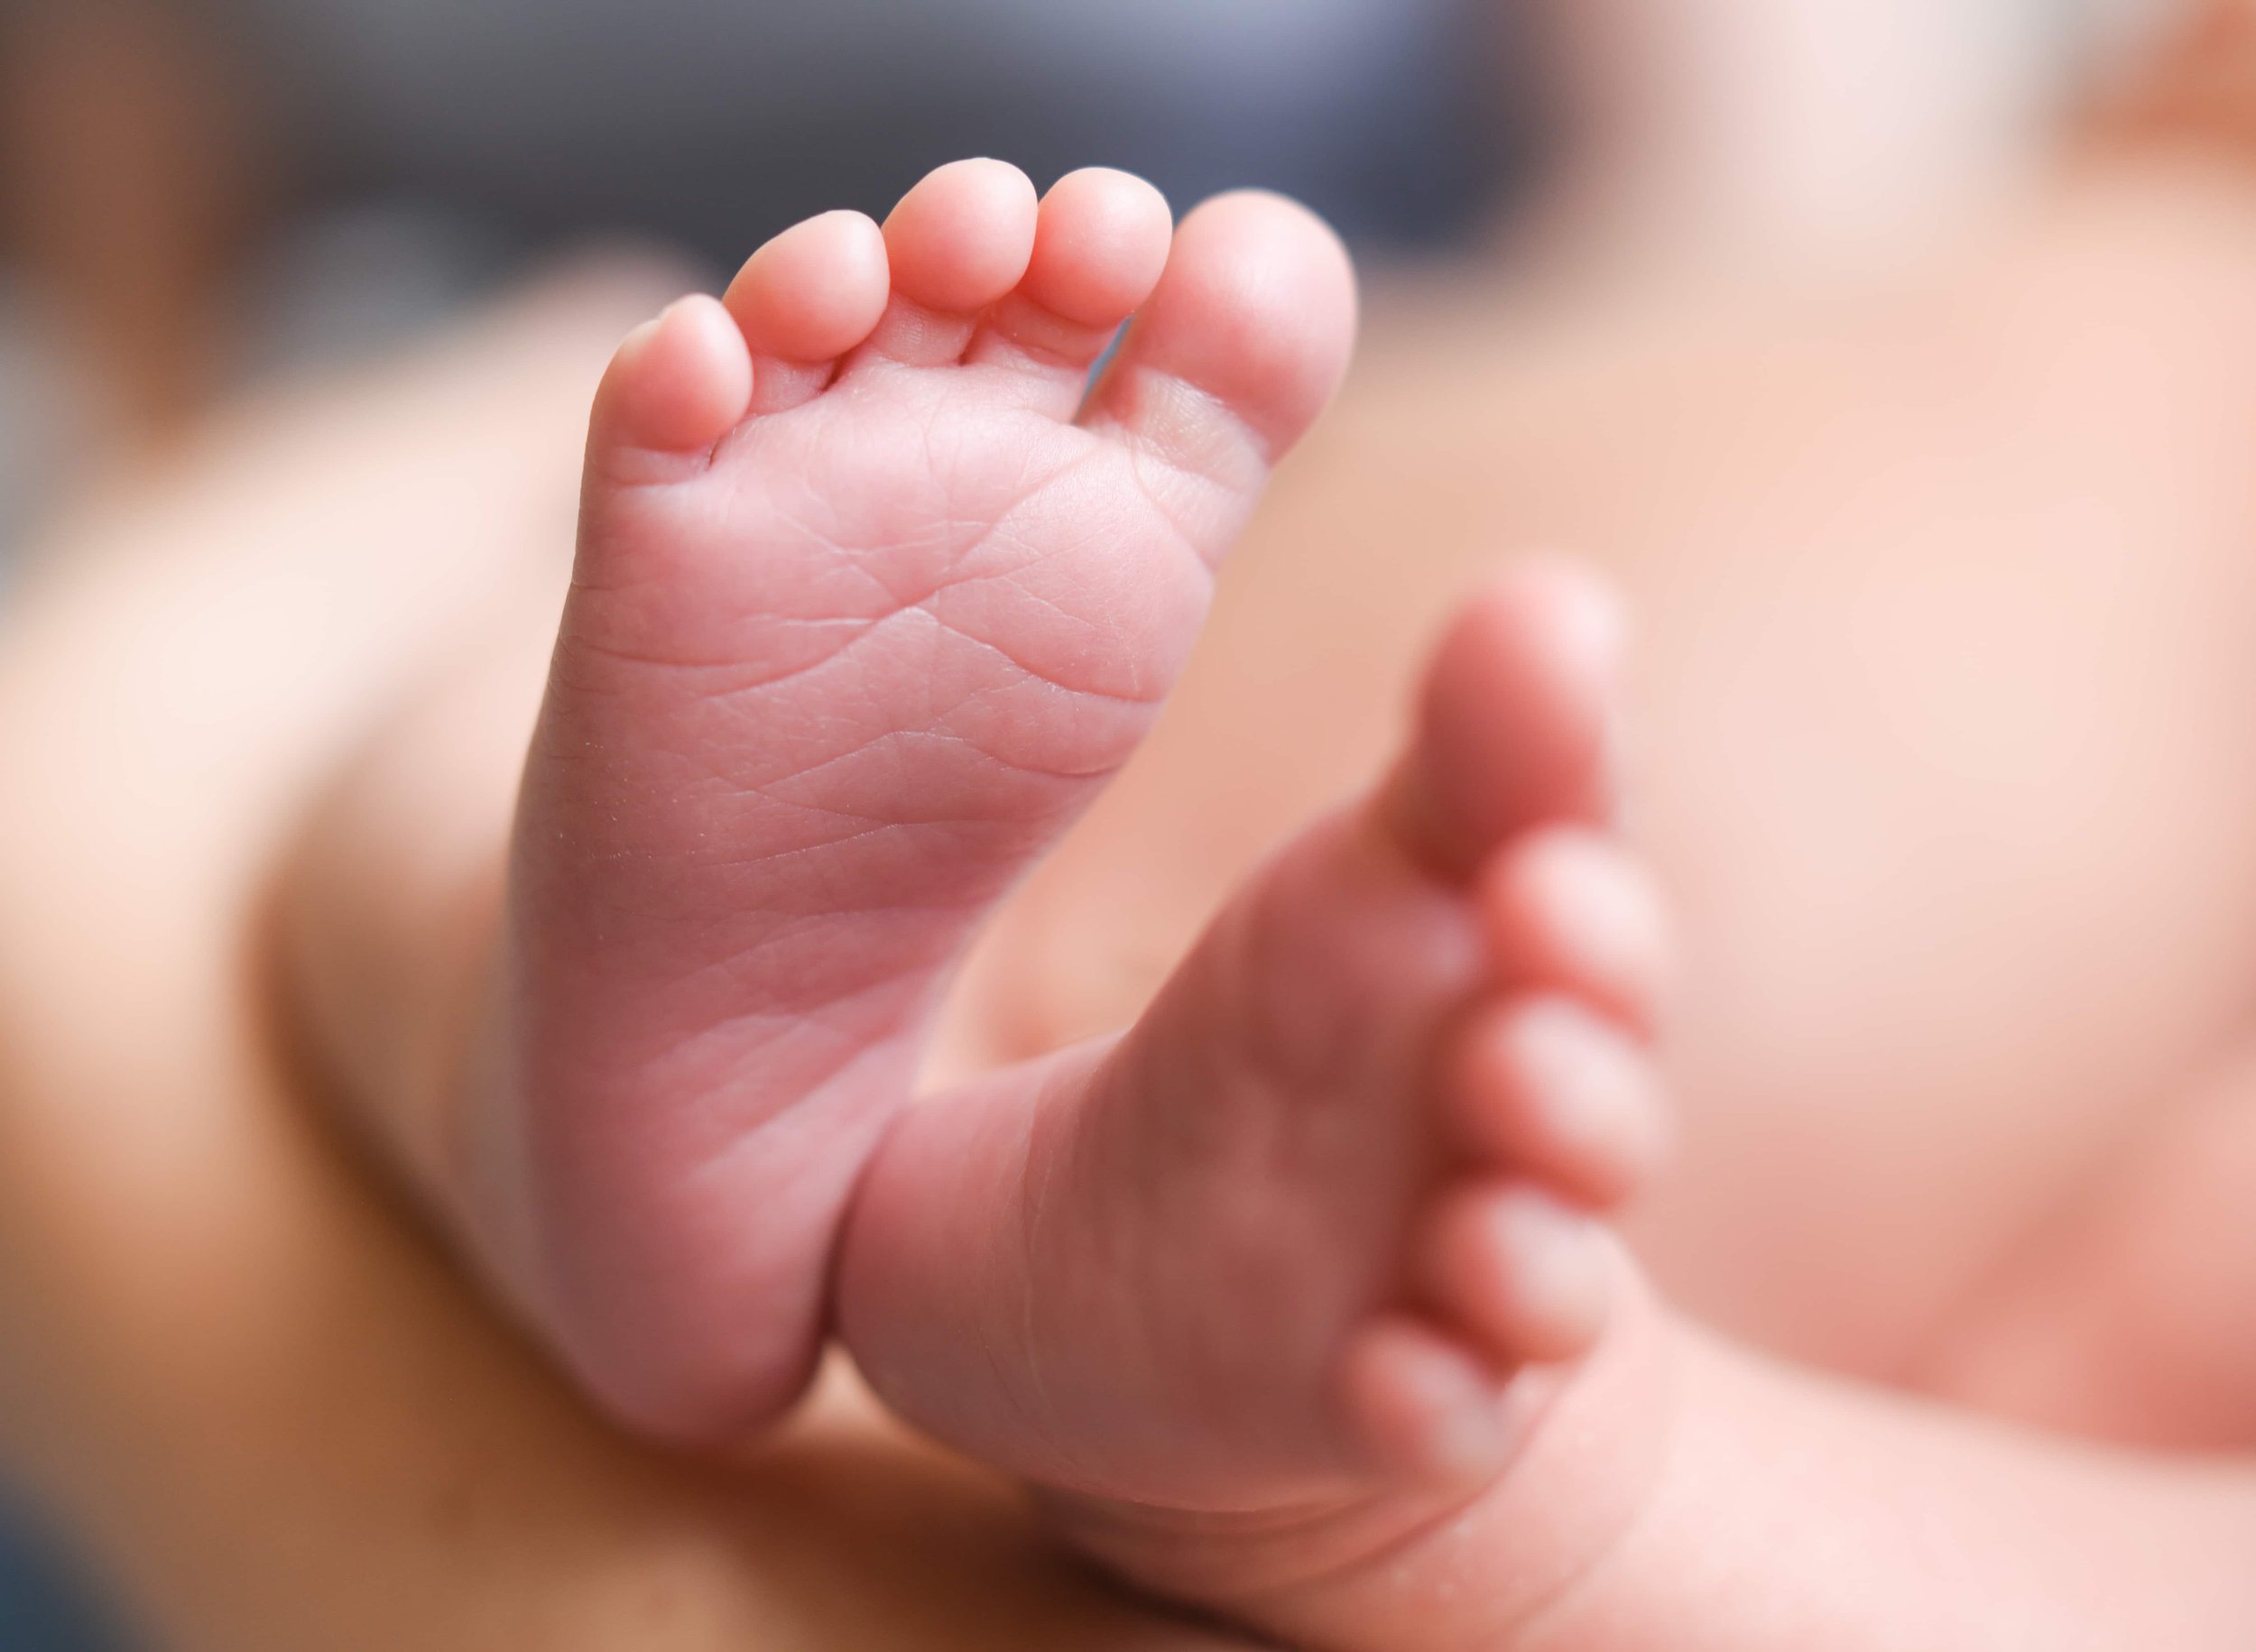 Natural and unposed close-up of newborn baby's feet